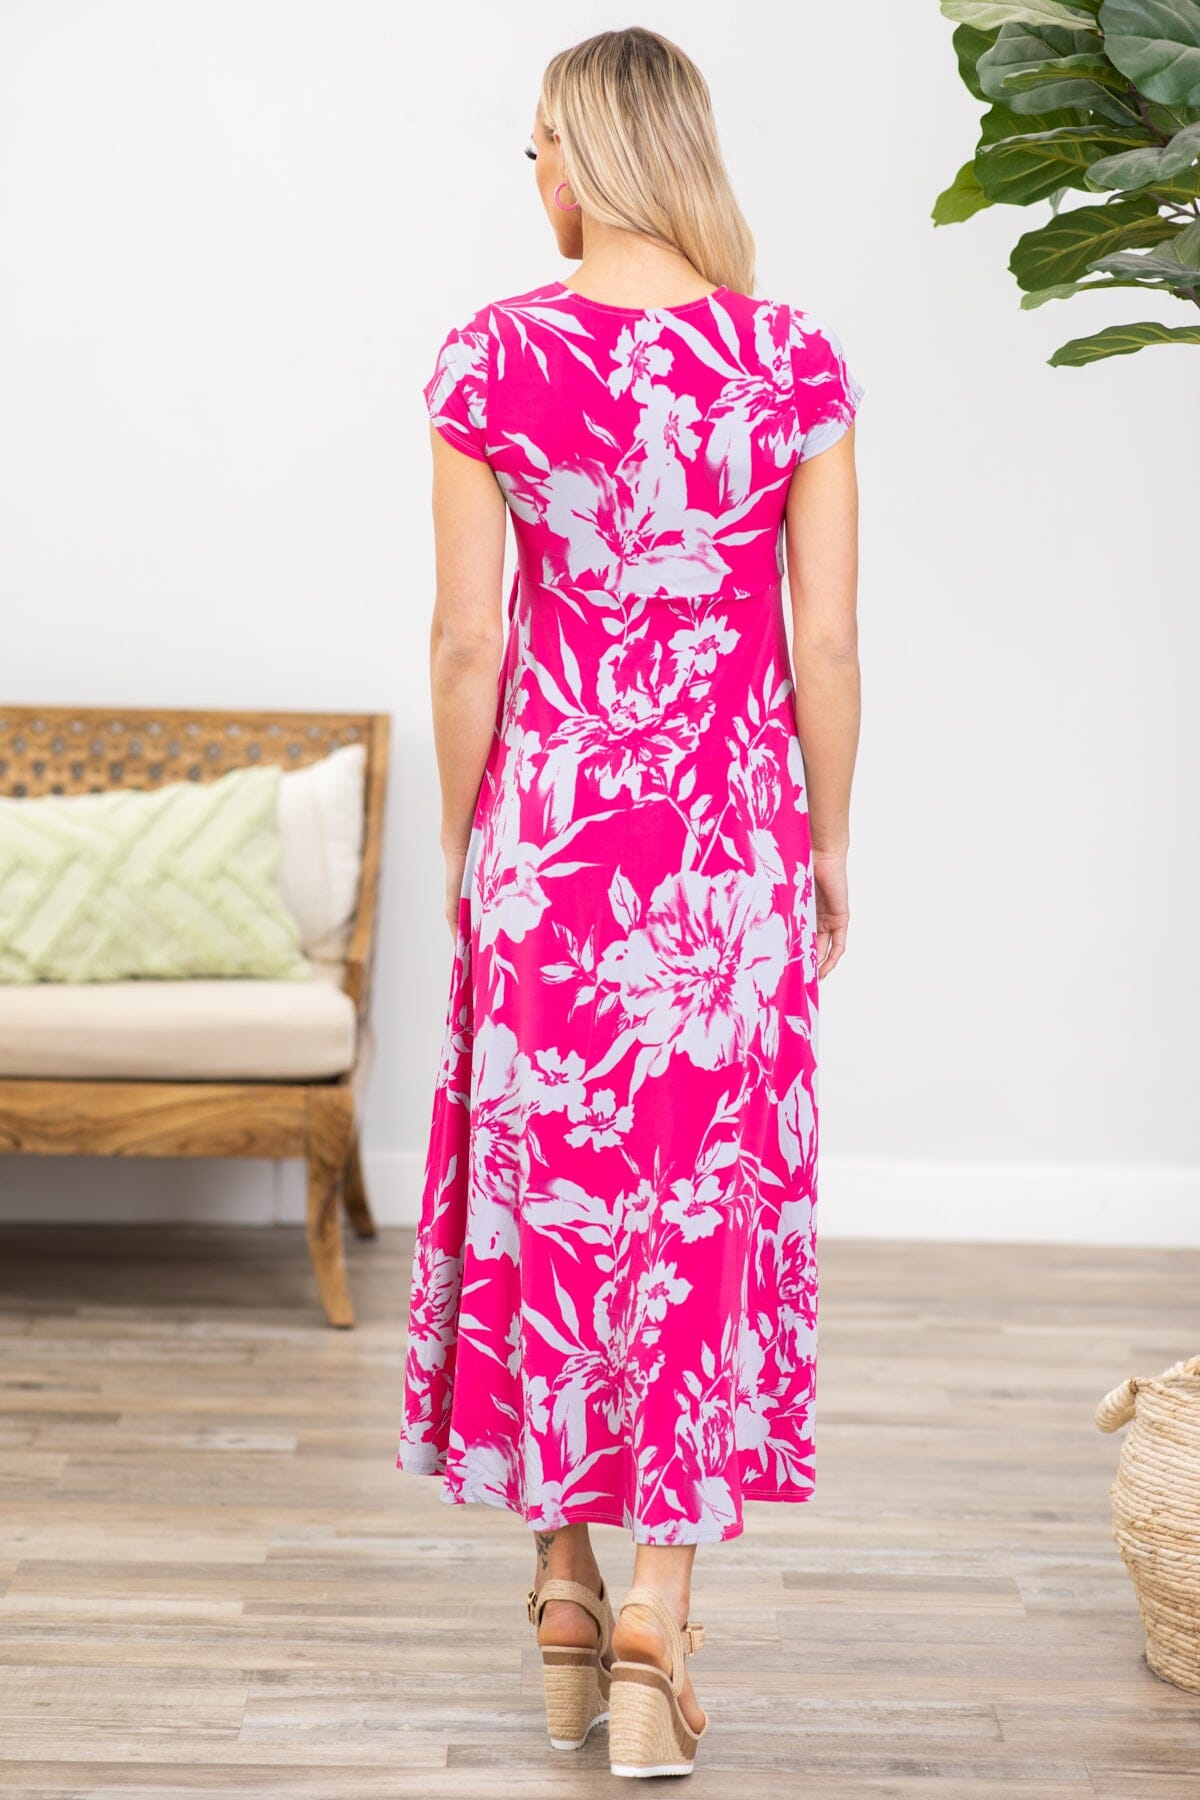 Hot Pink and Grey Floral Print Maxi Dress - Filly Flair